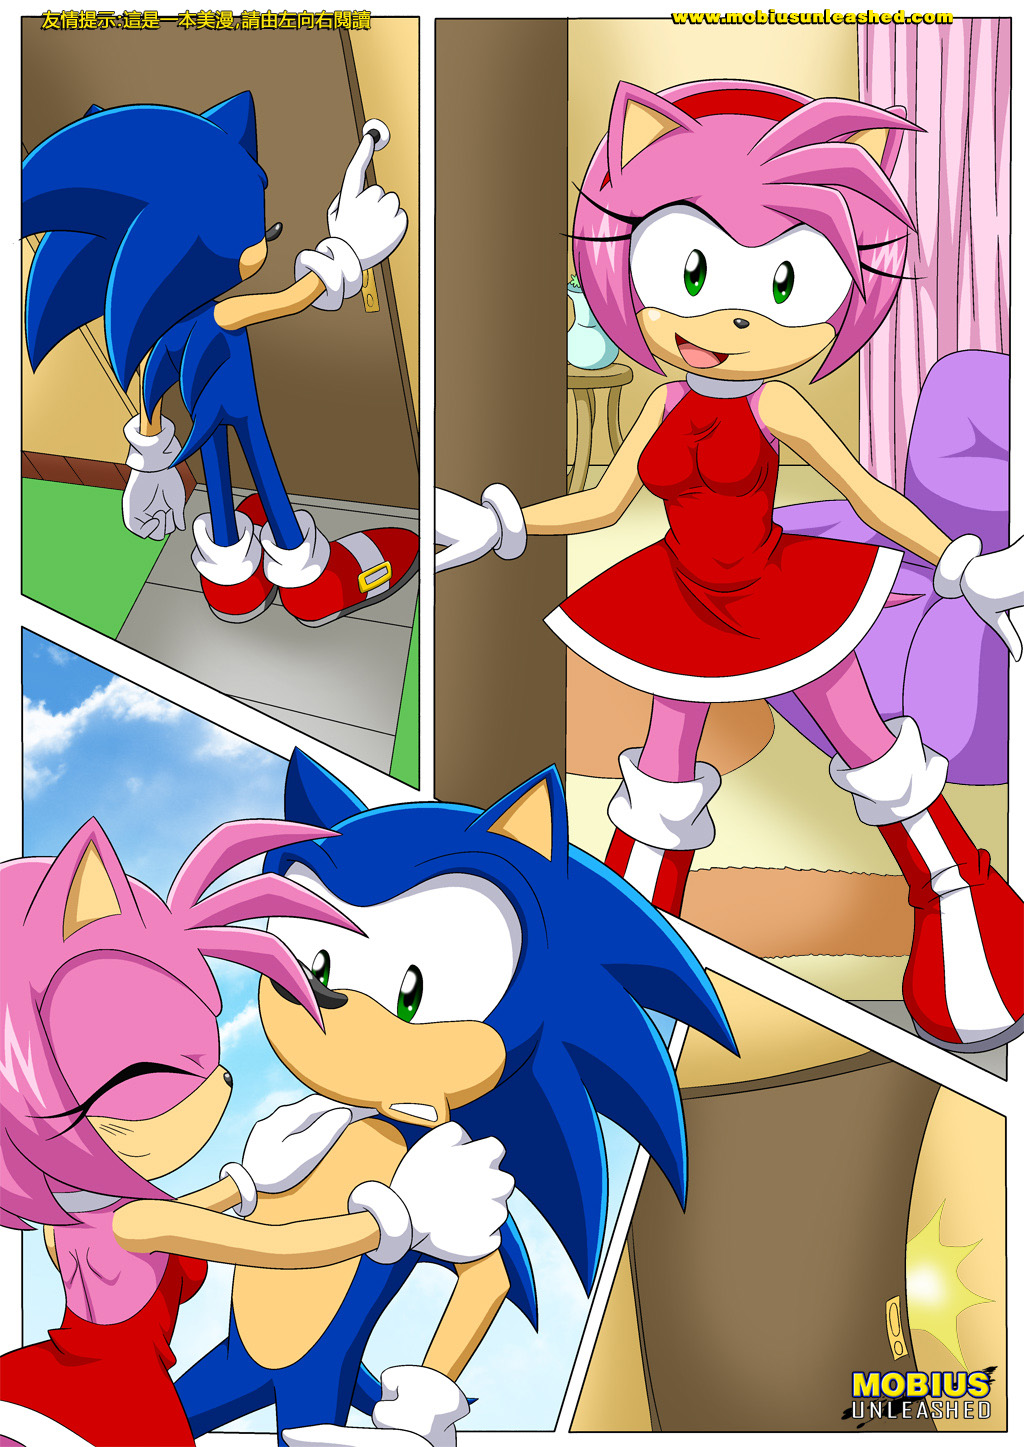 [Palcomix] Date Night ....without the Date (Sonic The Hedgehog) [Chinese] [里界漢化組] [Palcomix] Date Night ....without the Date (Sonic The Hedgehog) [中国翻訳]